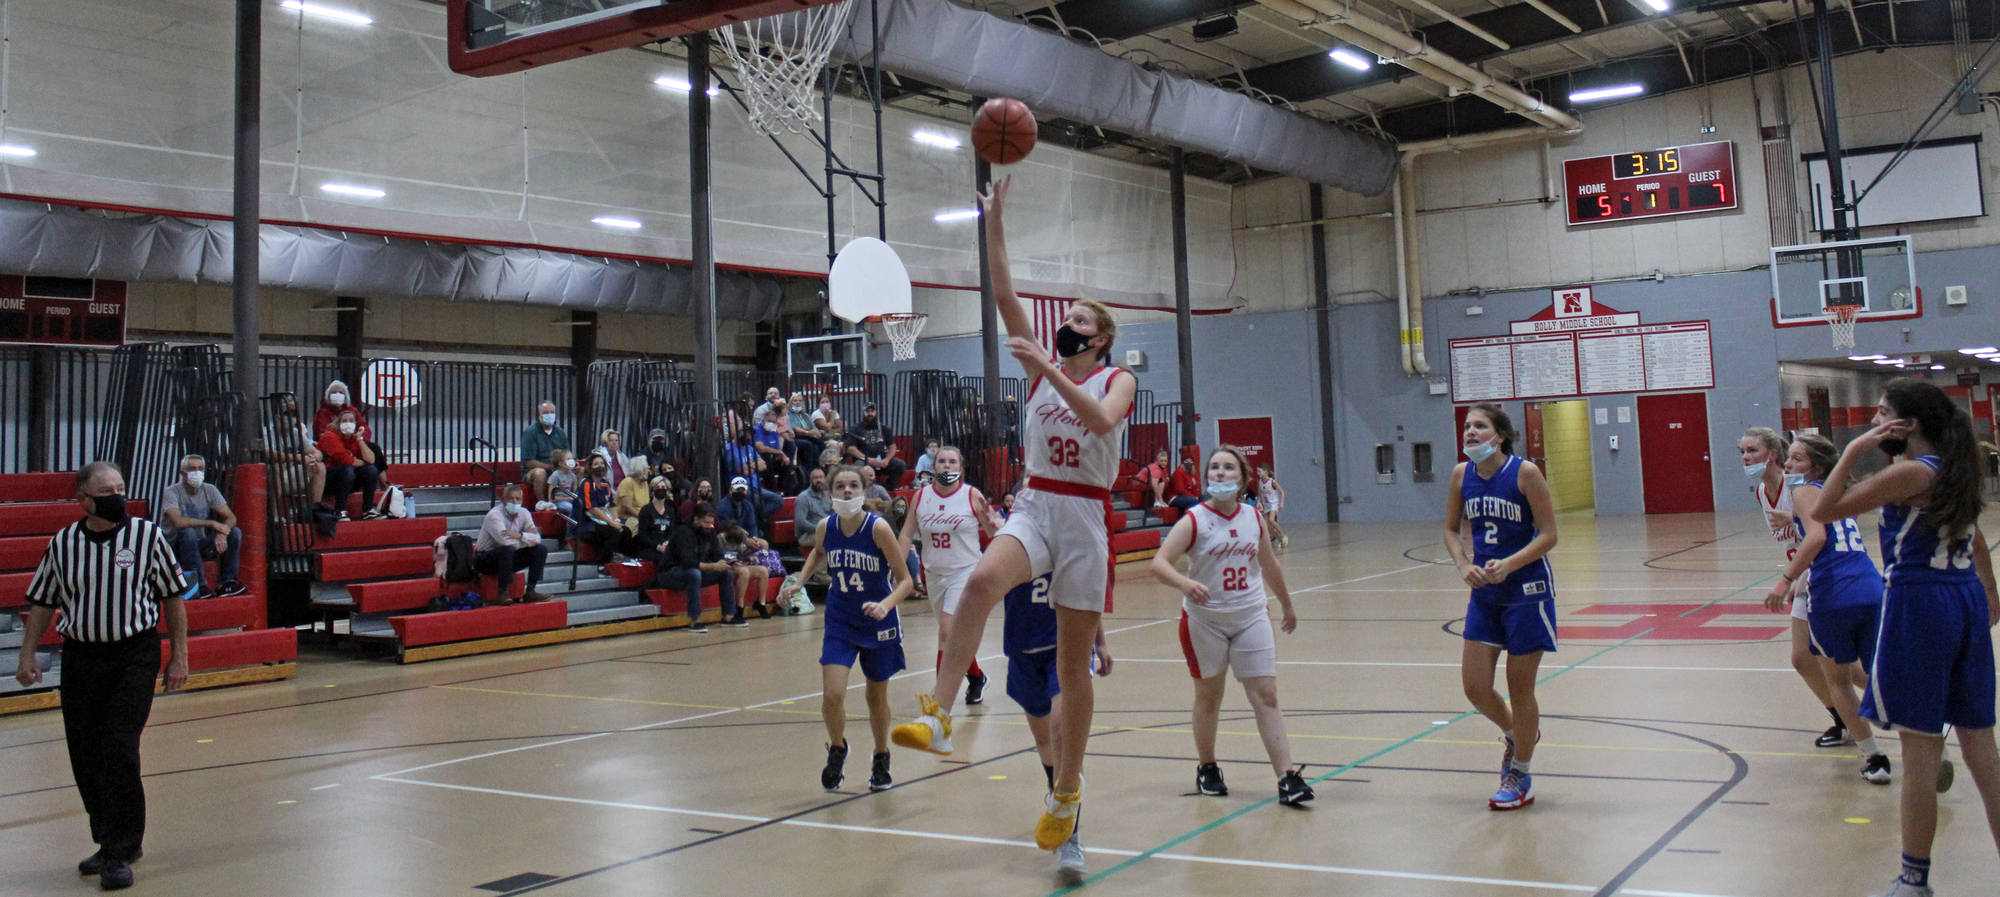 Female girls basketball game with student making a layup